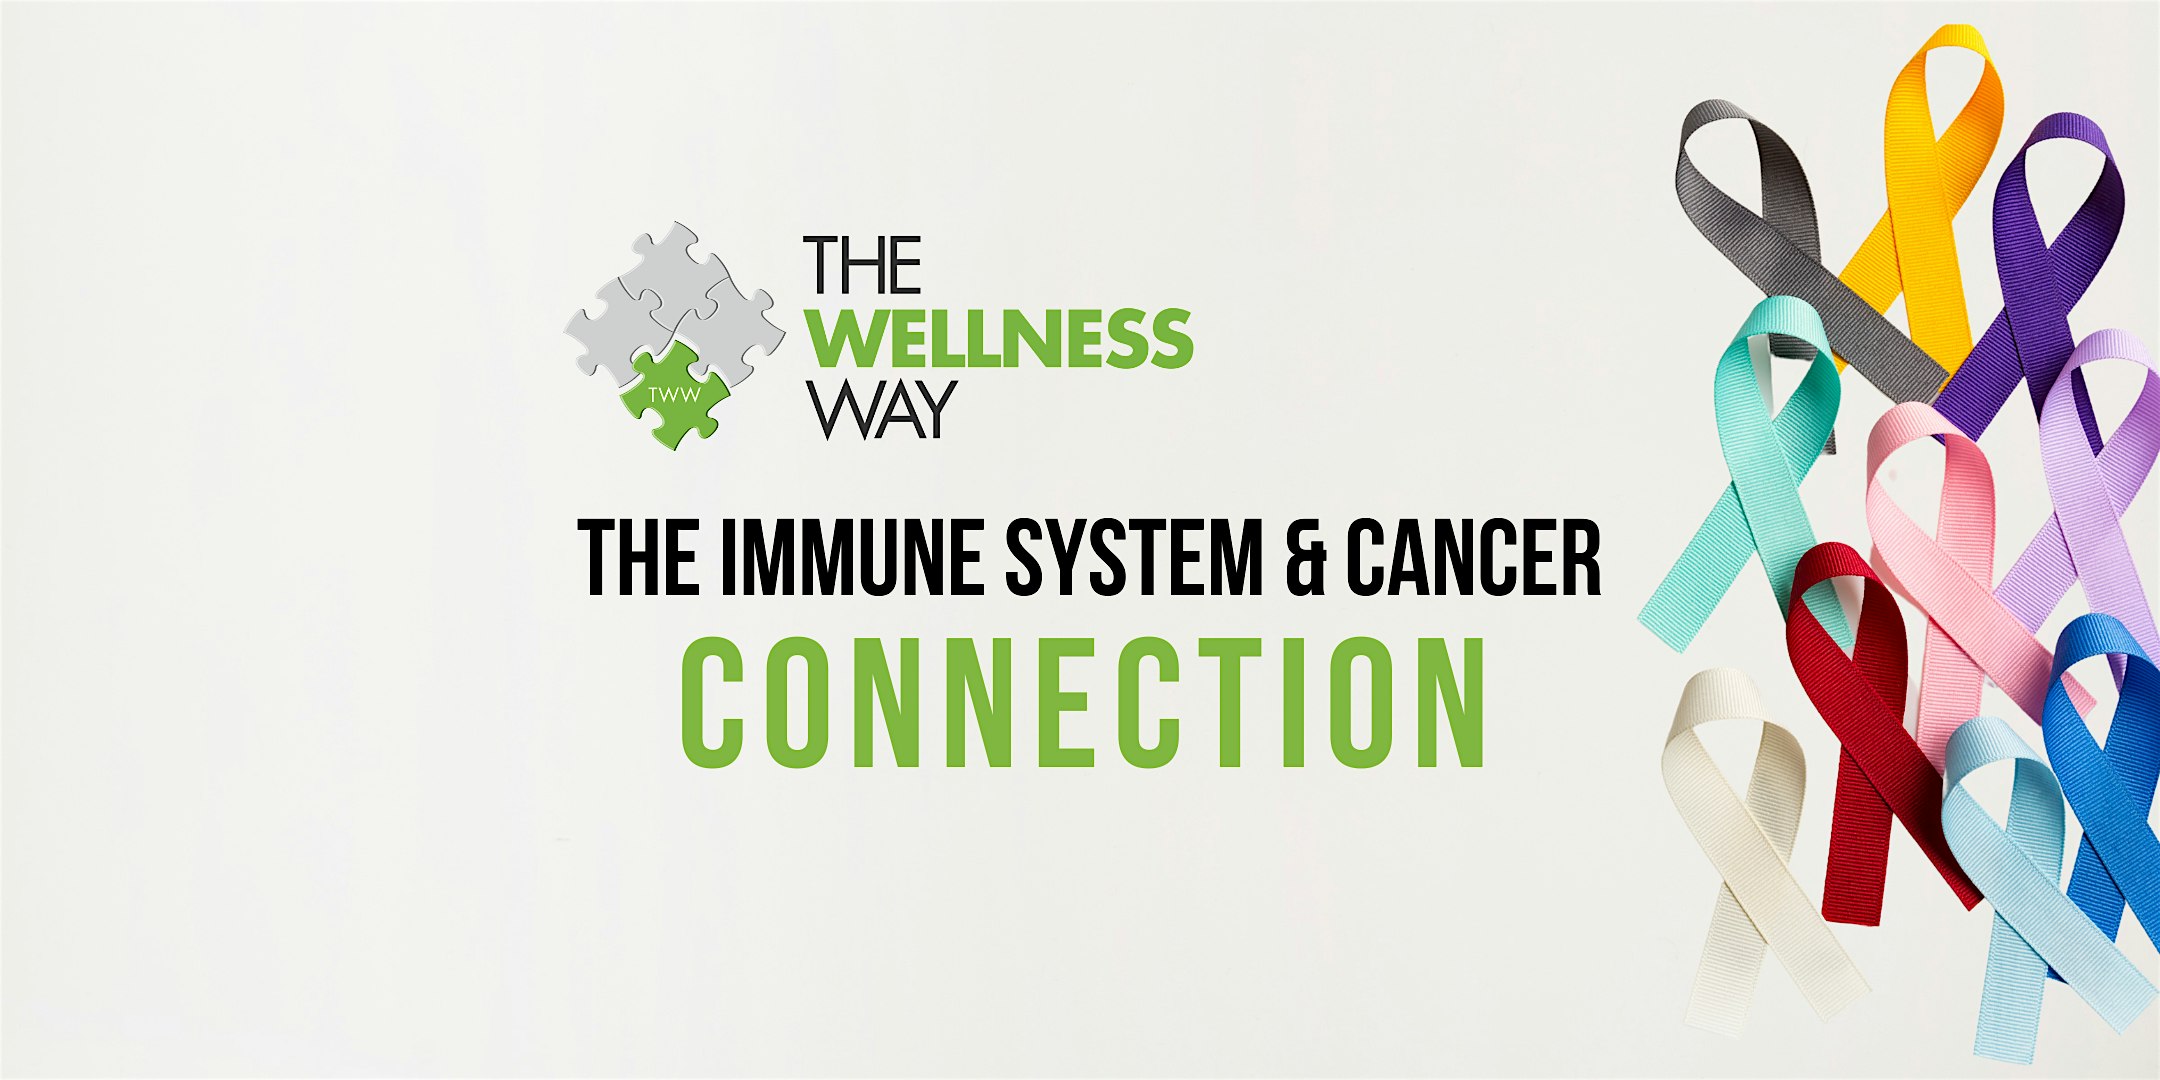 The Immune System & Cancer Connection